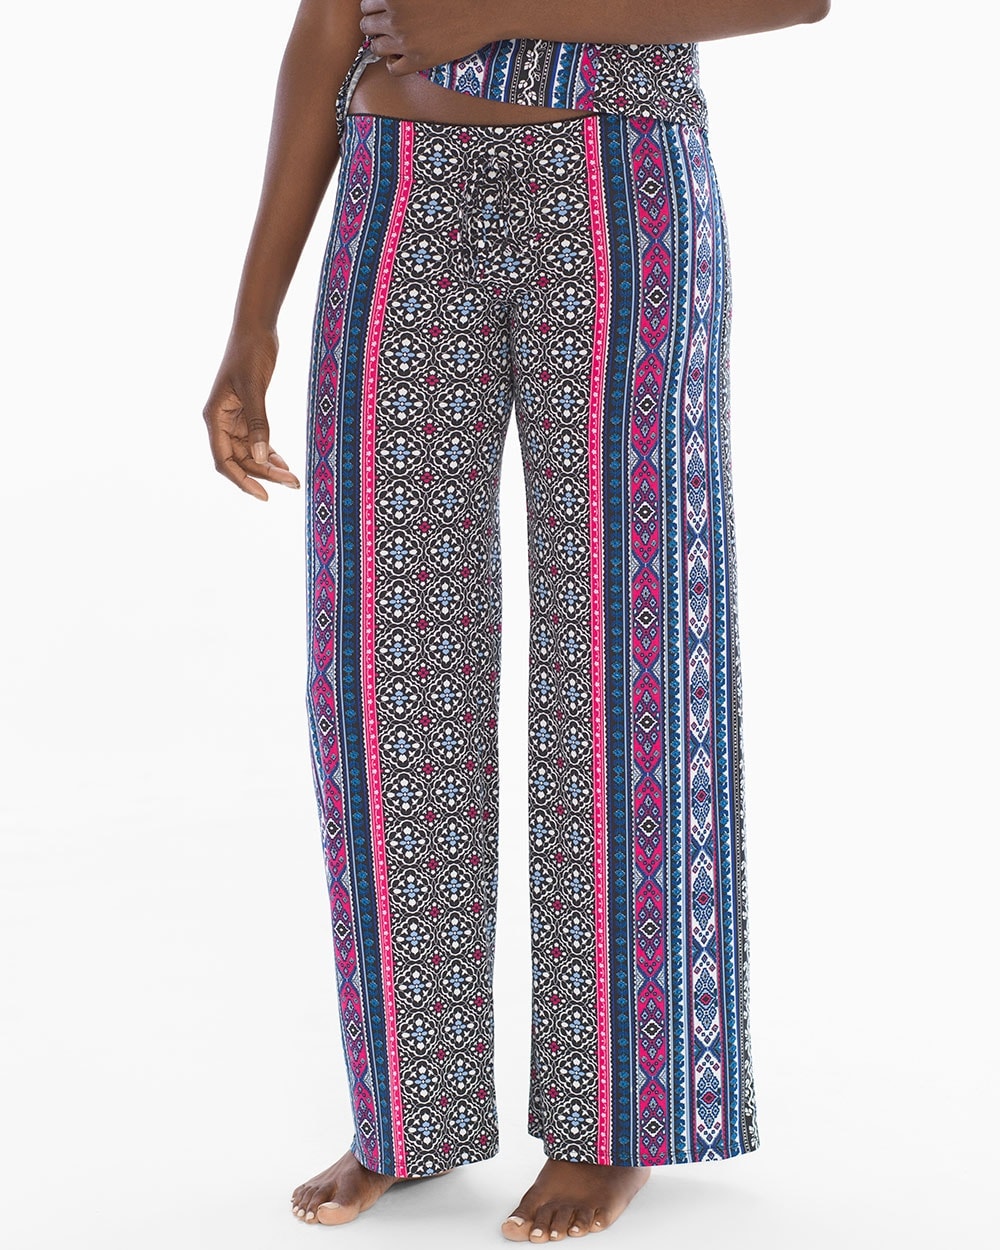 In Bloom Woven Ribbon Pant